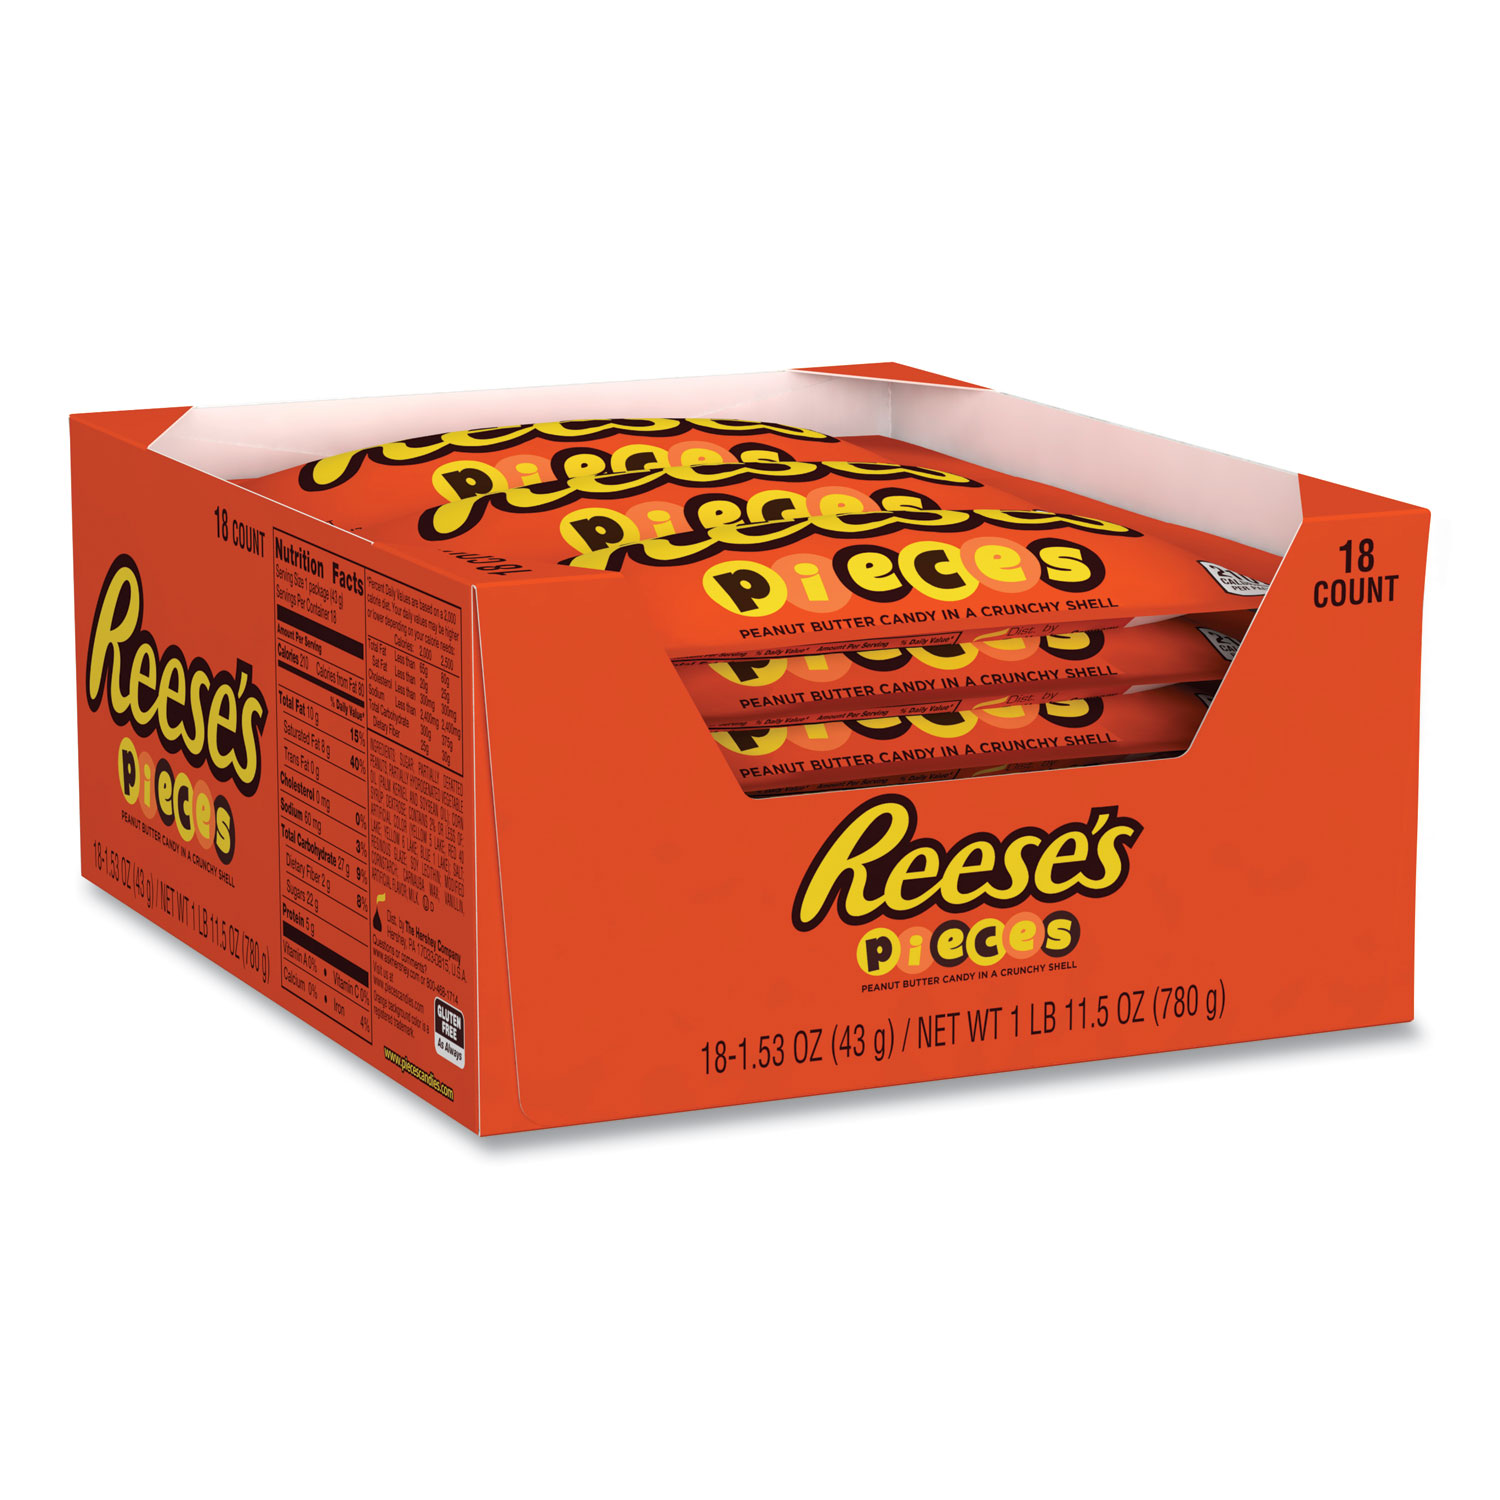  Reese's 24851 Pieces Candy, 1.53 oz Pack, 18 Packs/Box, Free Delivery in 1-4 Business Days (GRR20901312) 